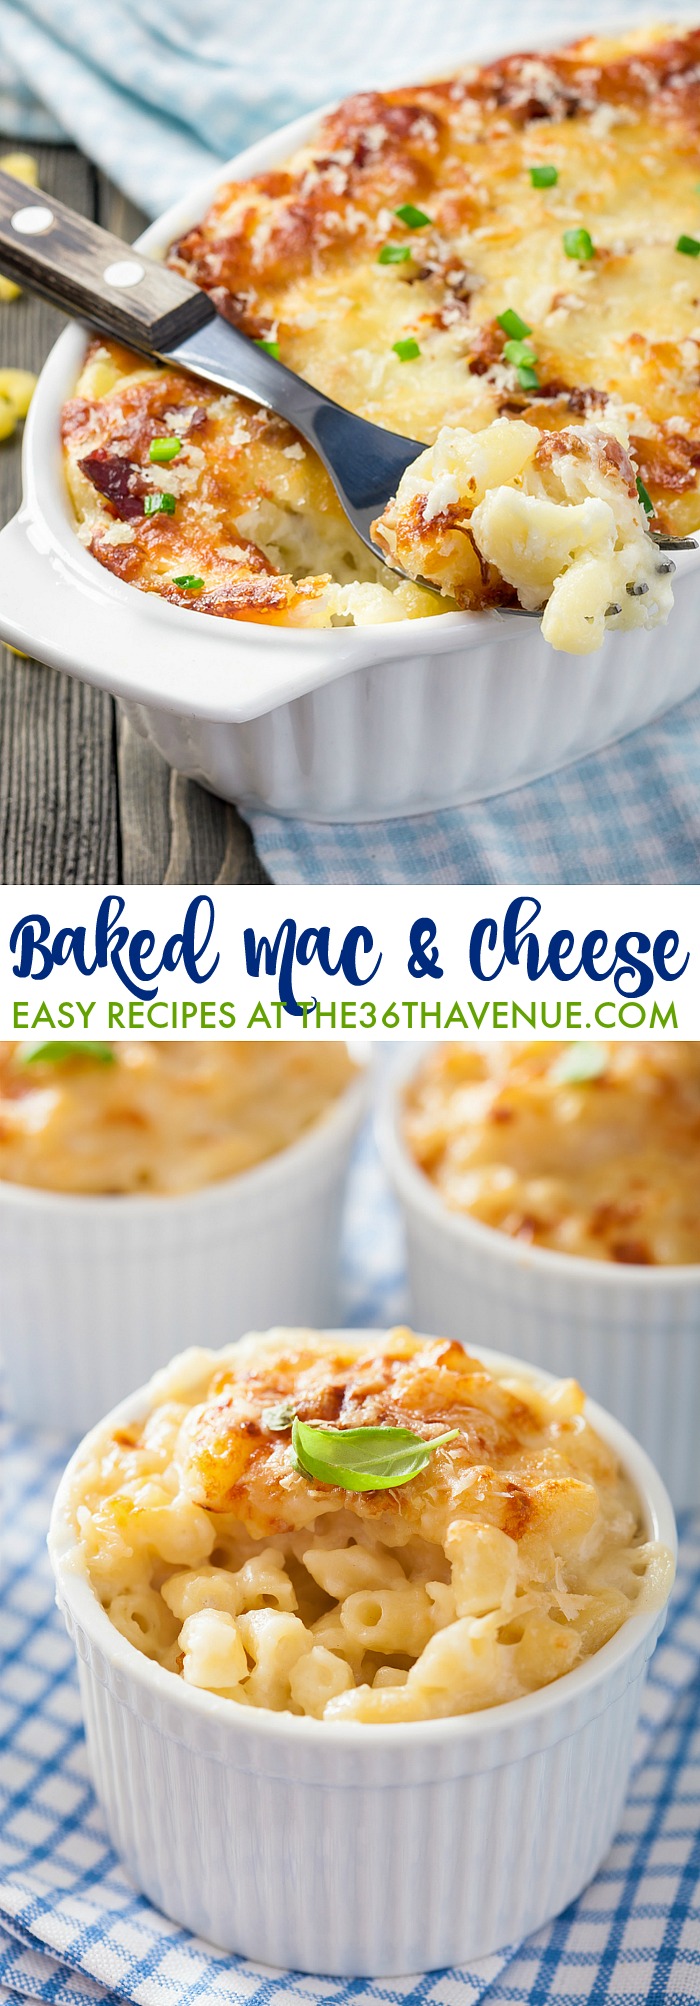 Baked Macaroni and Cheese Recipe The 36th AVENUE